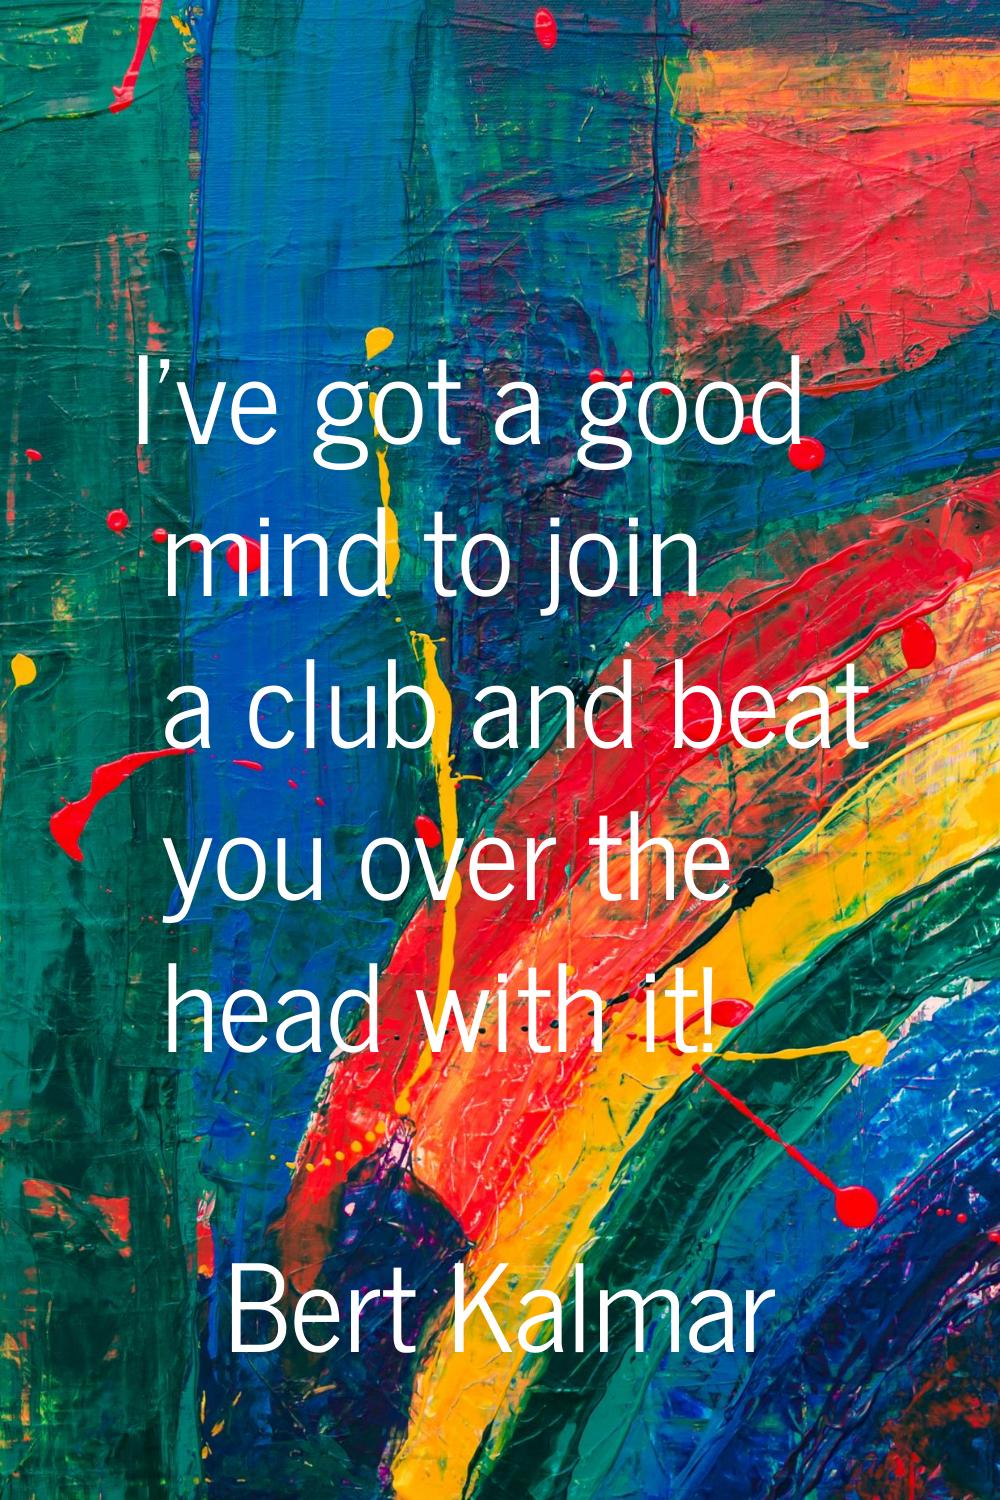 I've got a good mind to join a club and beat you over the head with it!